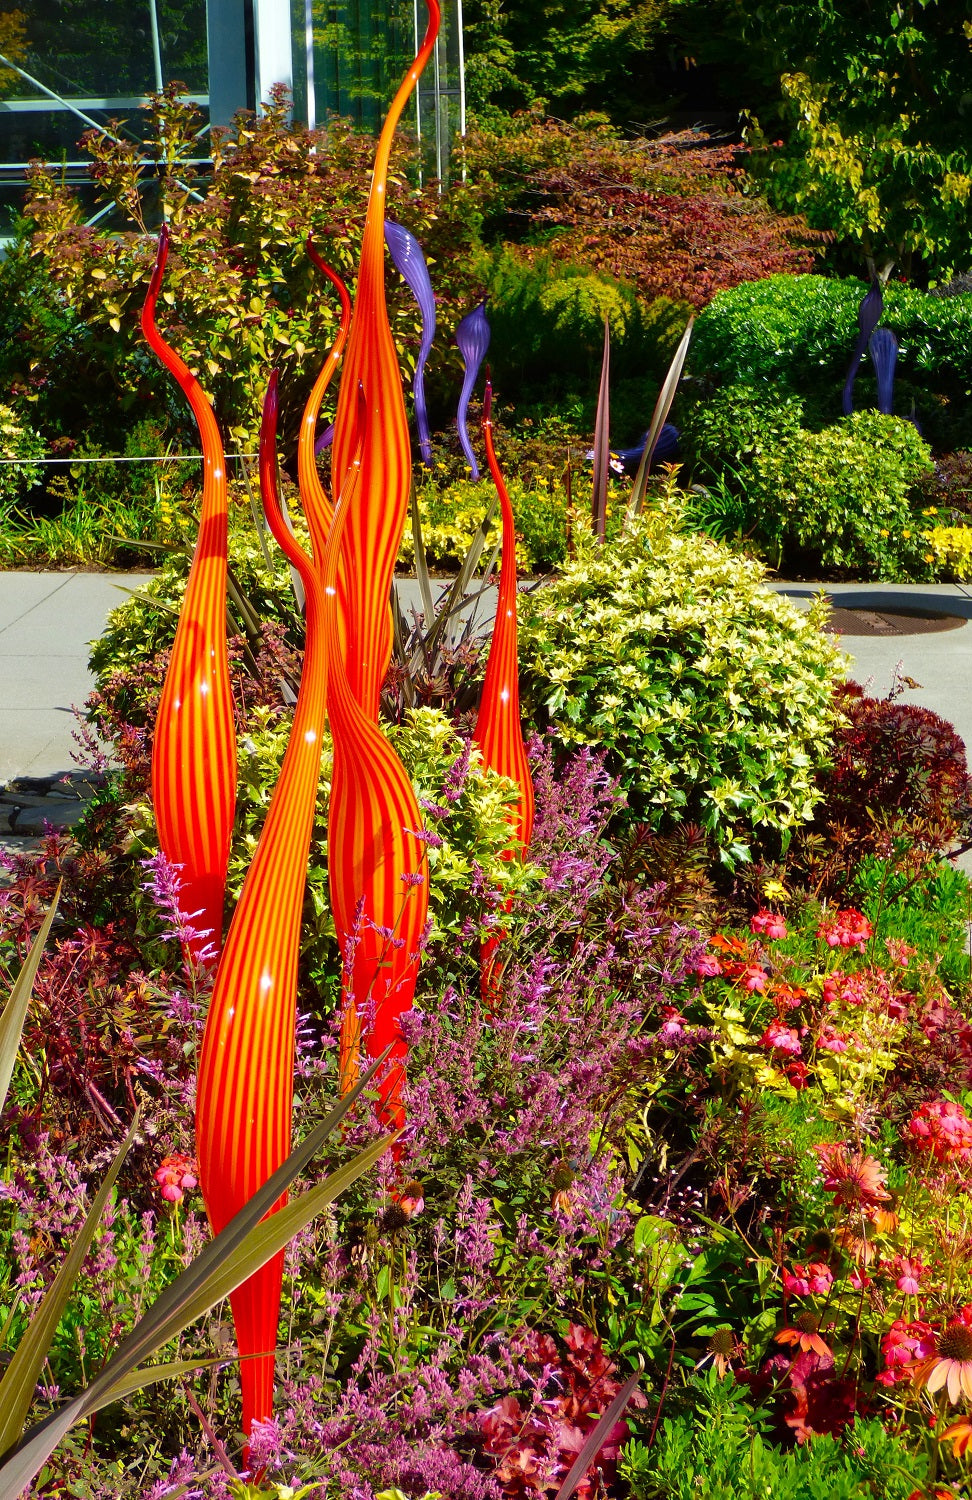 Phormium Plant at Chihuly Garden and Glass